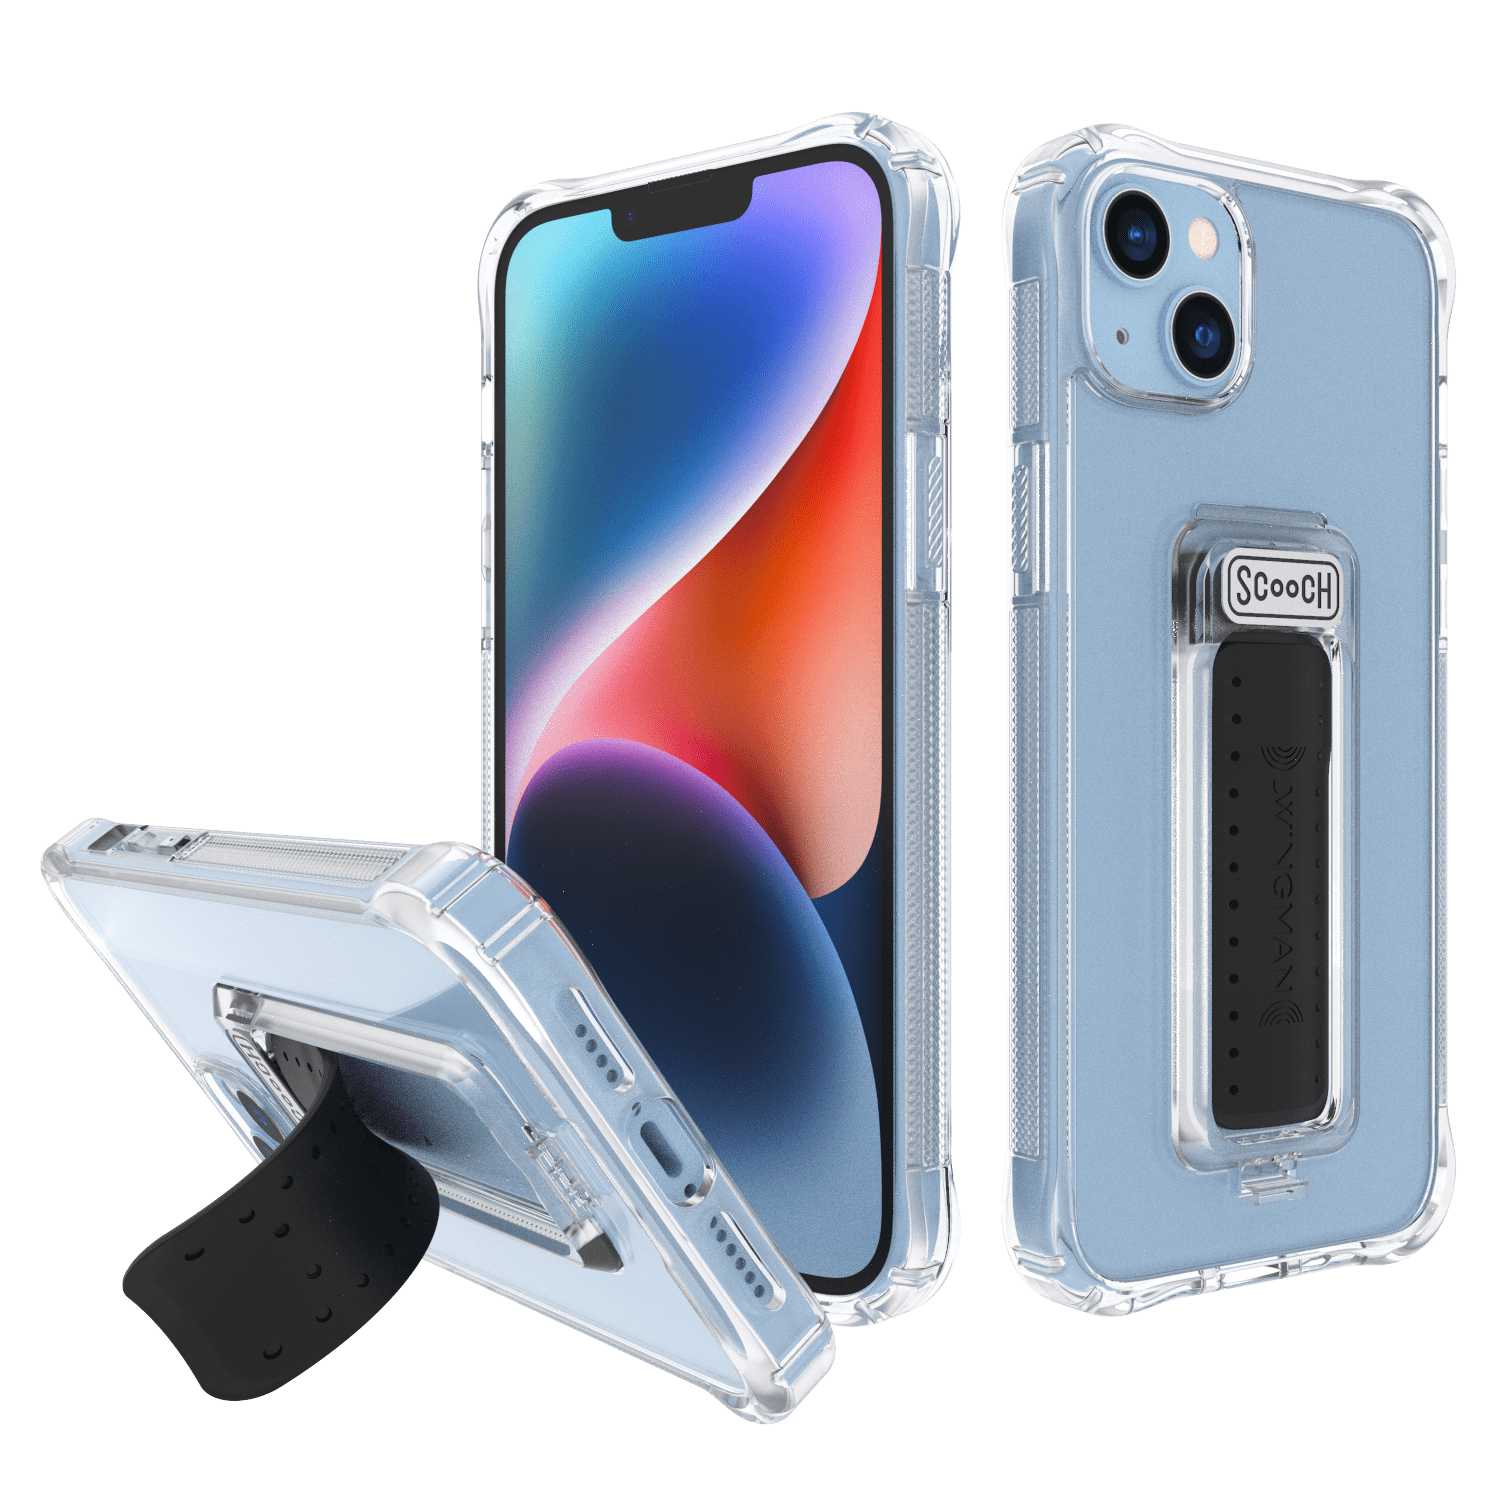 iPhone 14 Plus Case with Kickstand, Phone Grip, and Mount - Wingman